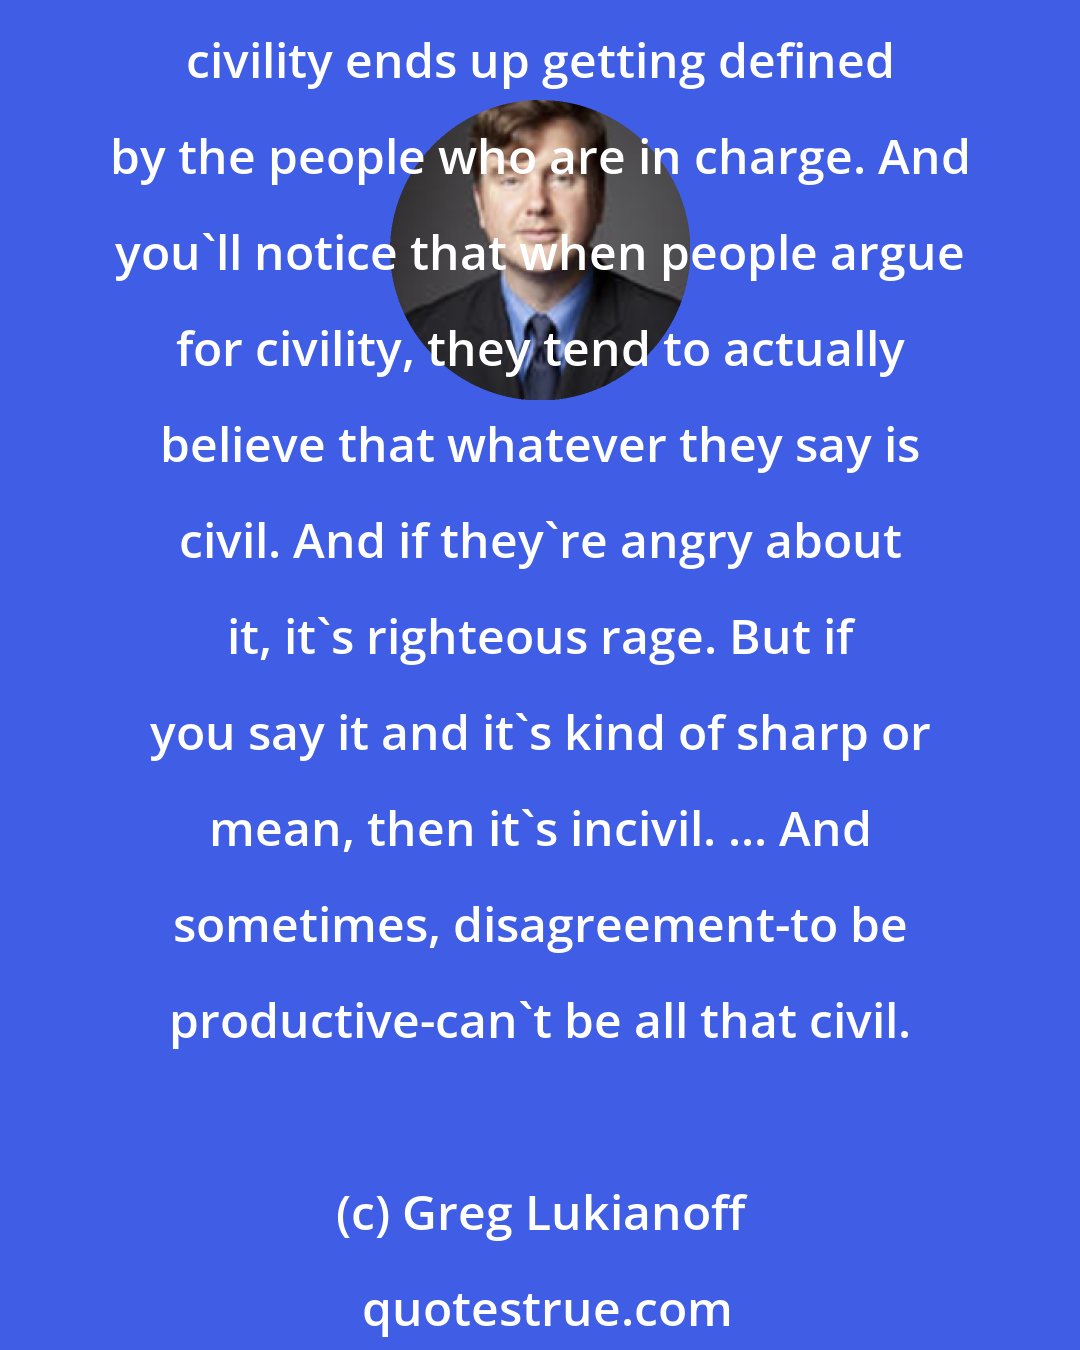 Greg Lukianoff: John Stuart Mill, in his wonderful 1859 book On Liberty, talks about civility. And this is why you should always be concerned about calls for civility. He points out that civility ends up getting defined by the people who are in charge. And you'll notice that when people argue for civility, they tend to actually believe that whatever they say is civil. And if they're angry about it, it's righteous rage. But if you say it and it's kind of sharp or mean, then it's incivil. ... And sometimes, disagreement-to be productive-can't be all that civil.